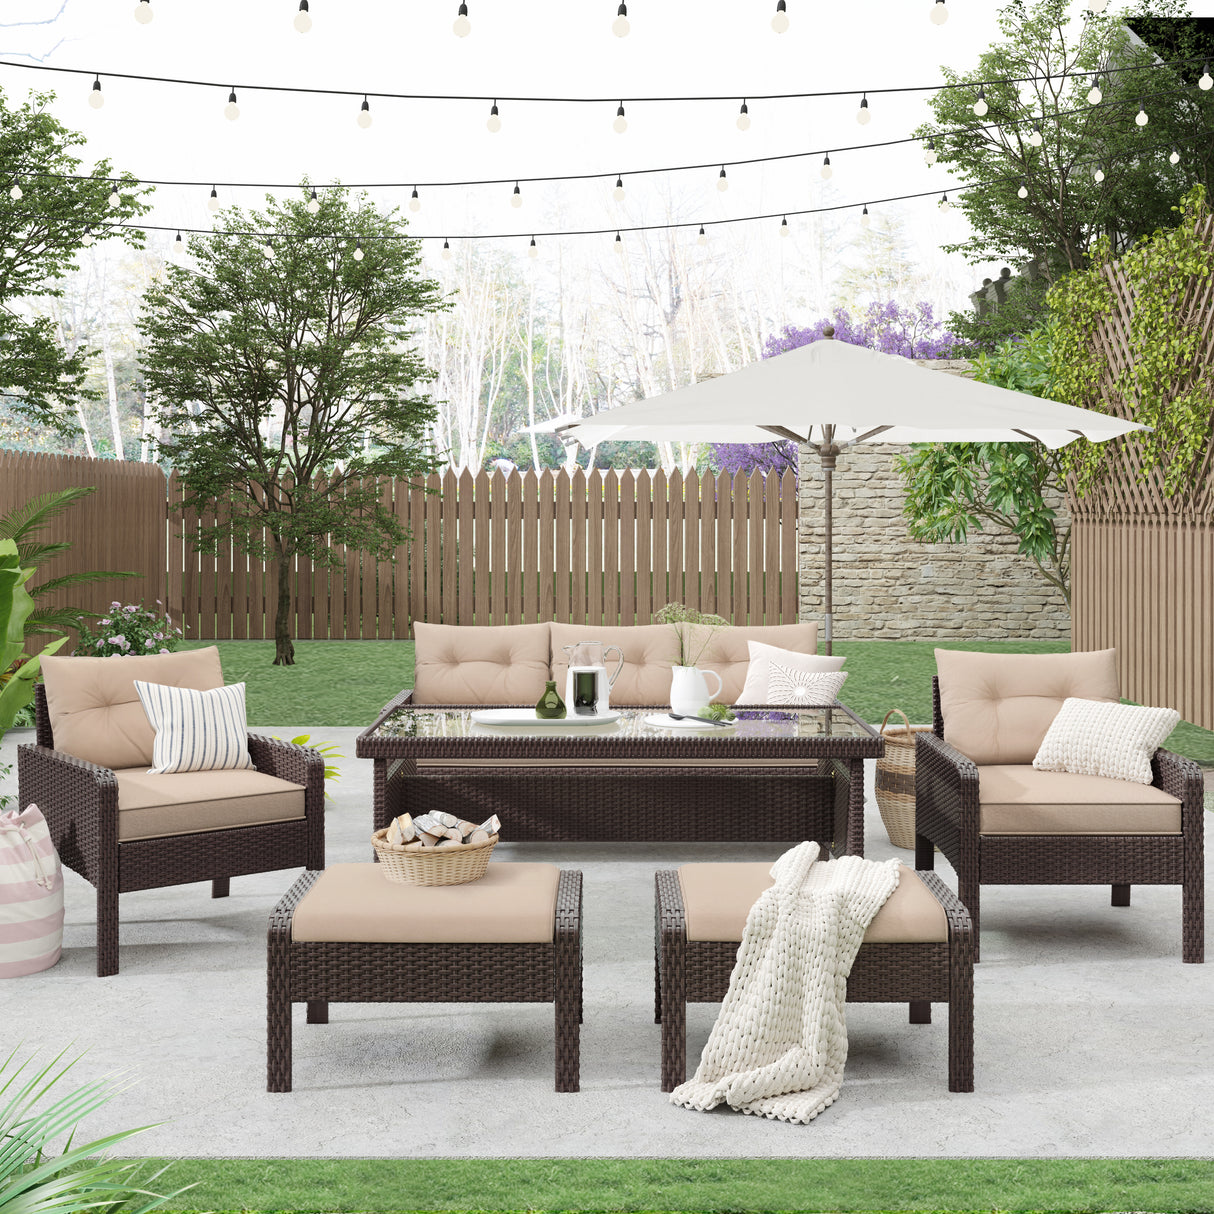 TOPMAX 6-Piece Outdoor Patio PE Wicker Rattan Sofa Set Dining Table Set with Removable Cushions and Tempered Glass Tea Table for Backyard, Poolside, Deck, Brown Wicker+Light Coffee Cushion